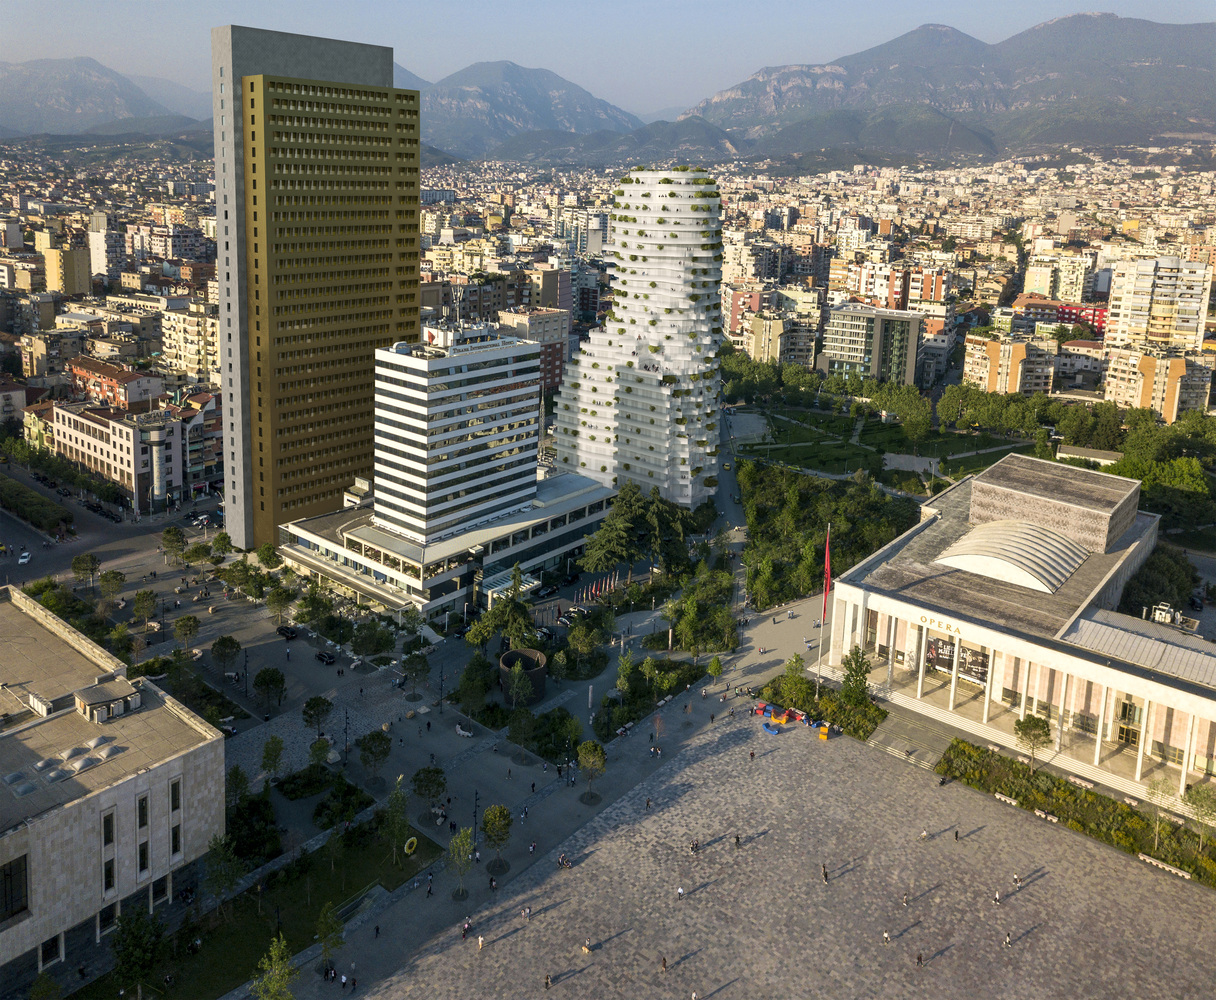 Mixed-Use Building in Albania shaped after the country's National Hero unveiled by MVRDV - Sheet2